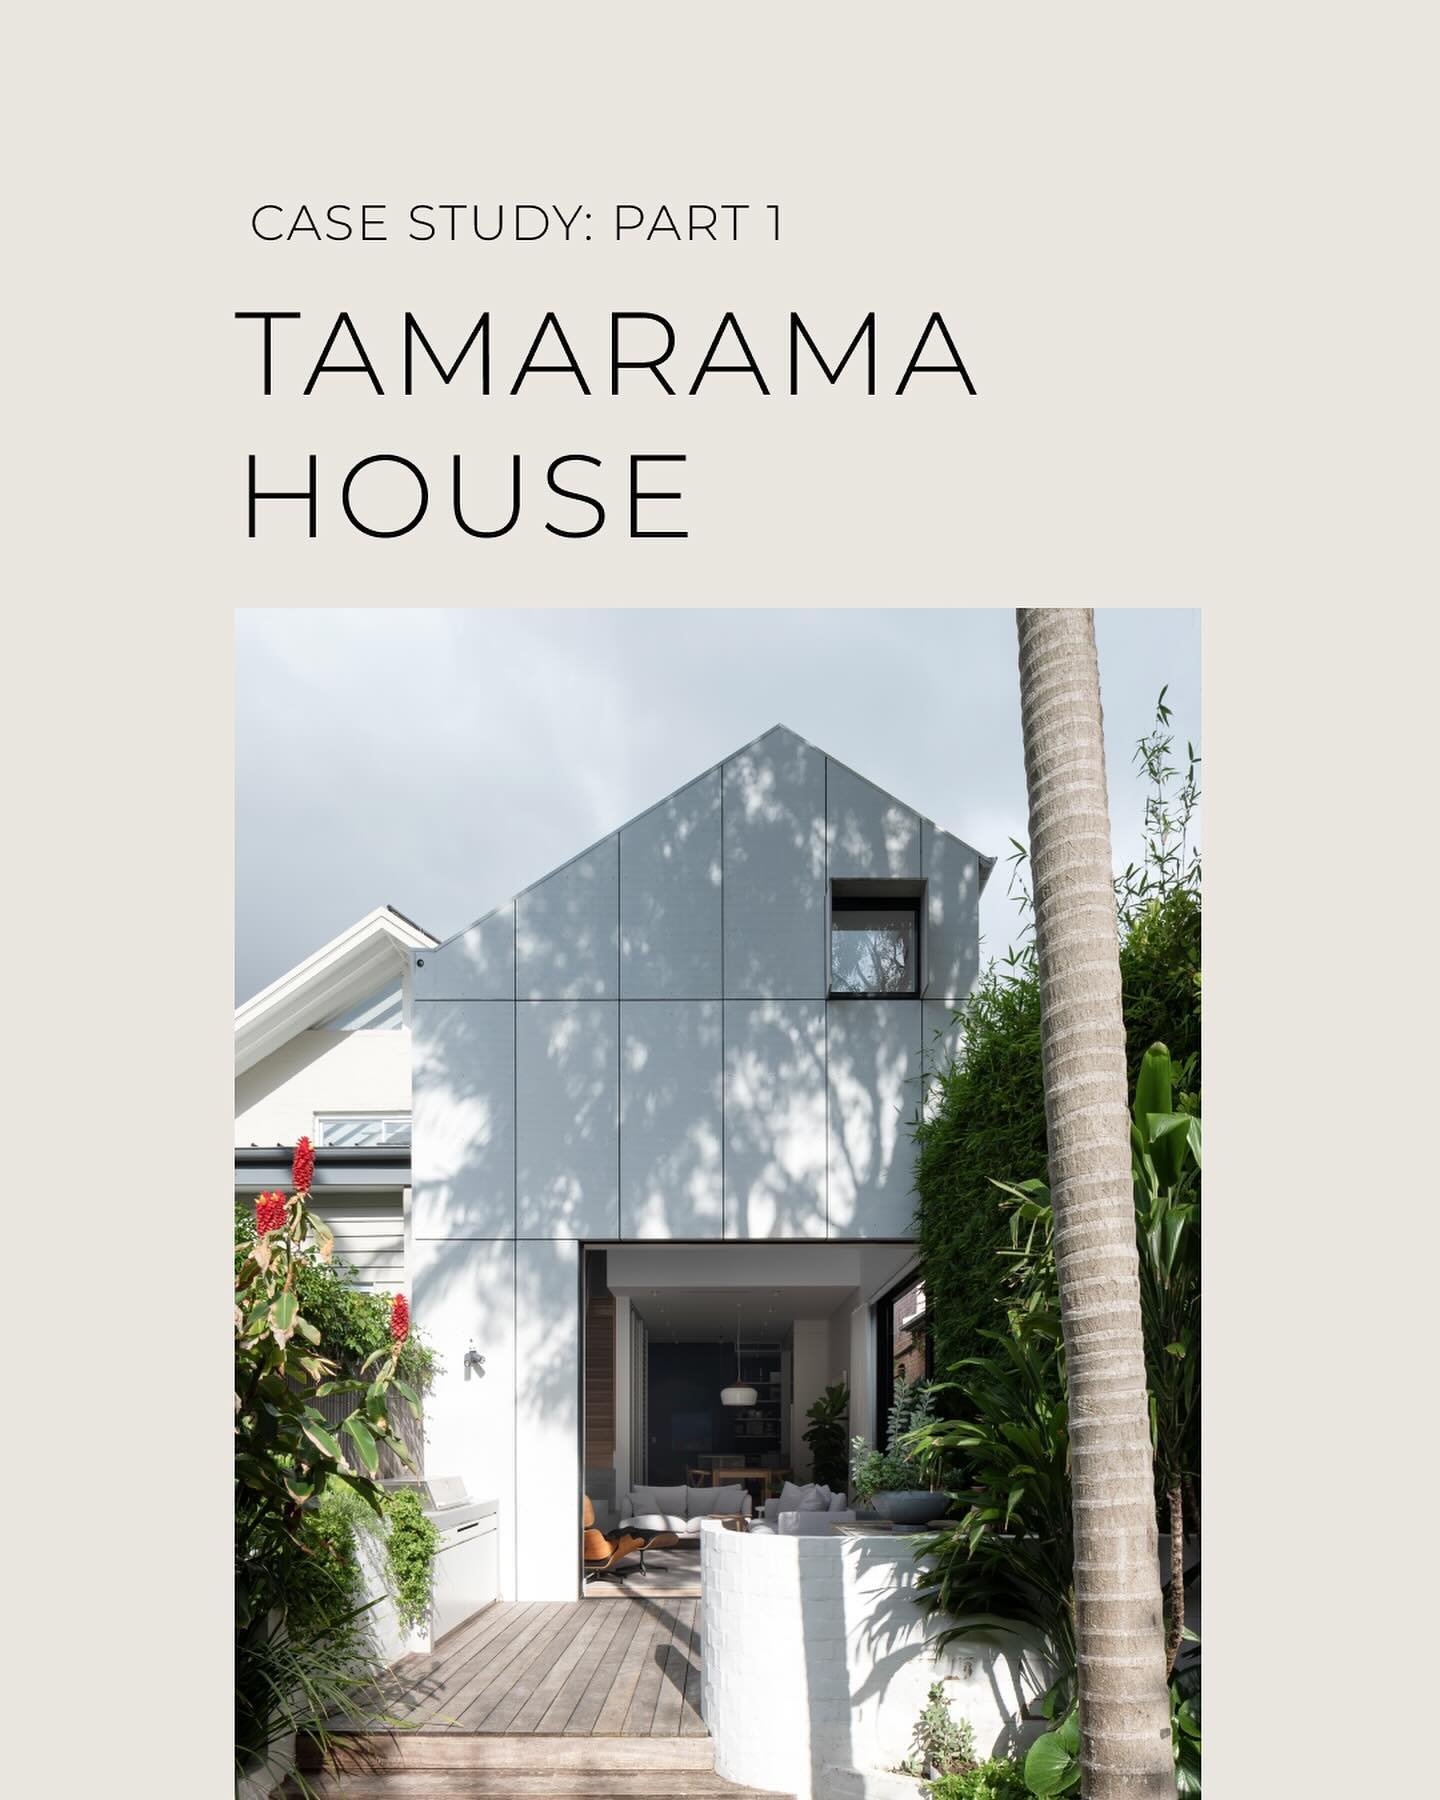 TAMA HOUSE

Despite initial challenges of a narrow and short layout, we tackled the renovation of this semi-detached house in Sydney&rsquo;s east with determination.

Overcoming issues of darkness and disconnection from the outdoors, our design journ